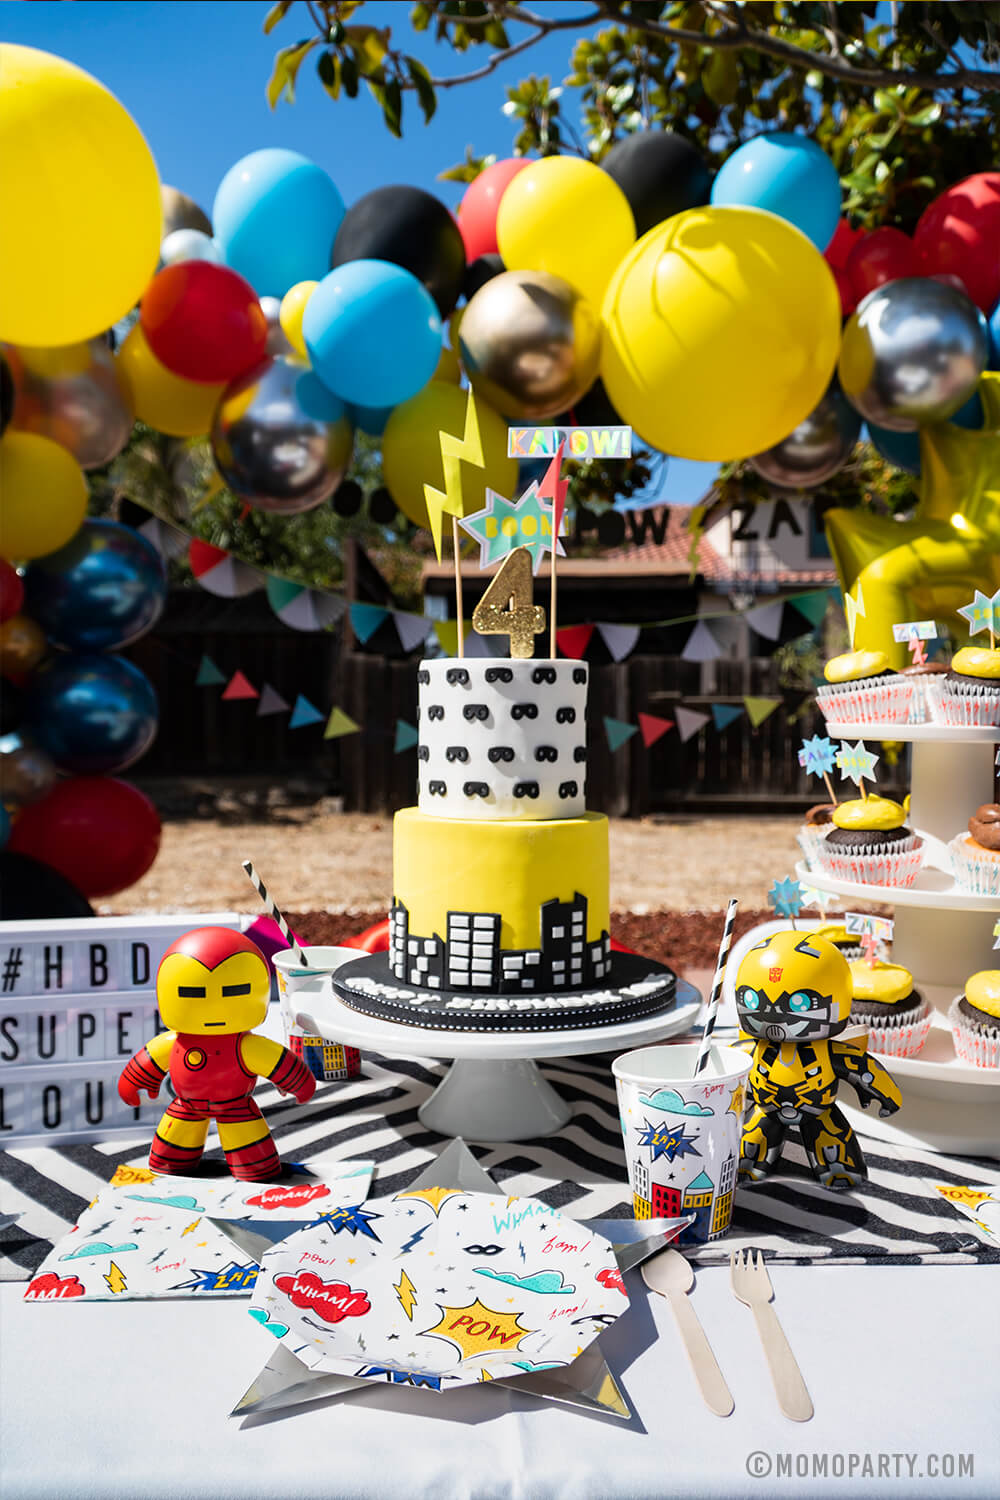 Kids modern superhero birthday party table set up with Day Dream Society Superhero Party Small Paper Plate, Star Silver Foil Plate, Superhero Napkins, and wooden utensil, Modern Superhero cake with number 4 gold glitter candle,  superhero sign cake topper, balloon garland as decoration on the back